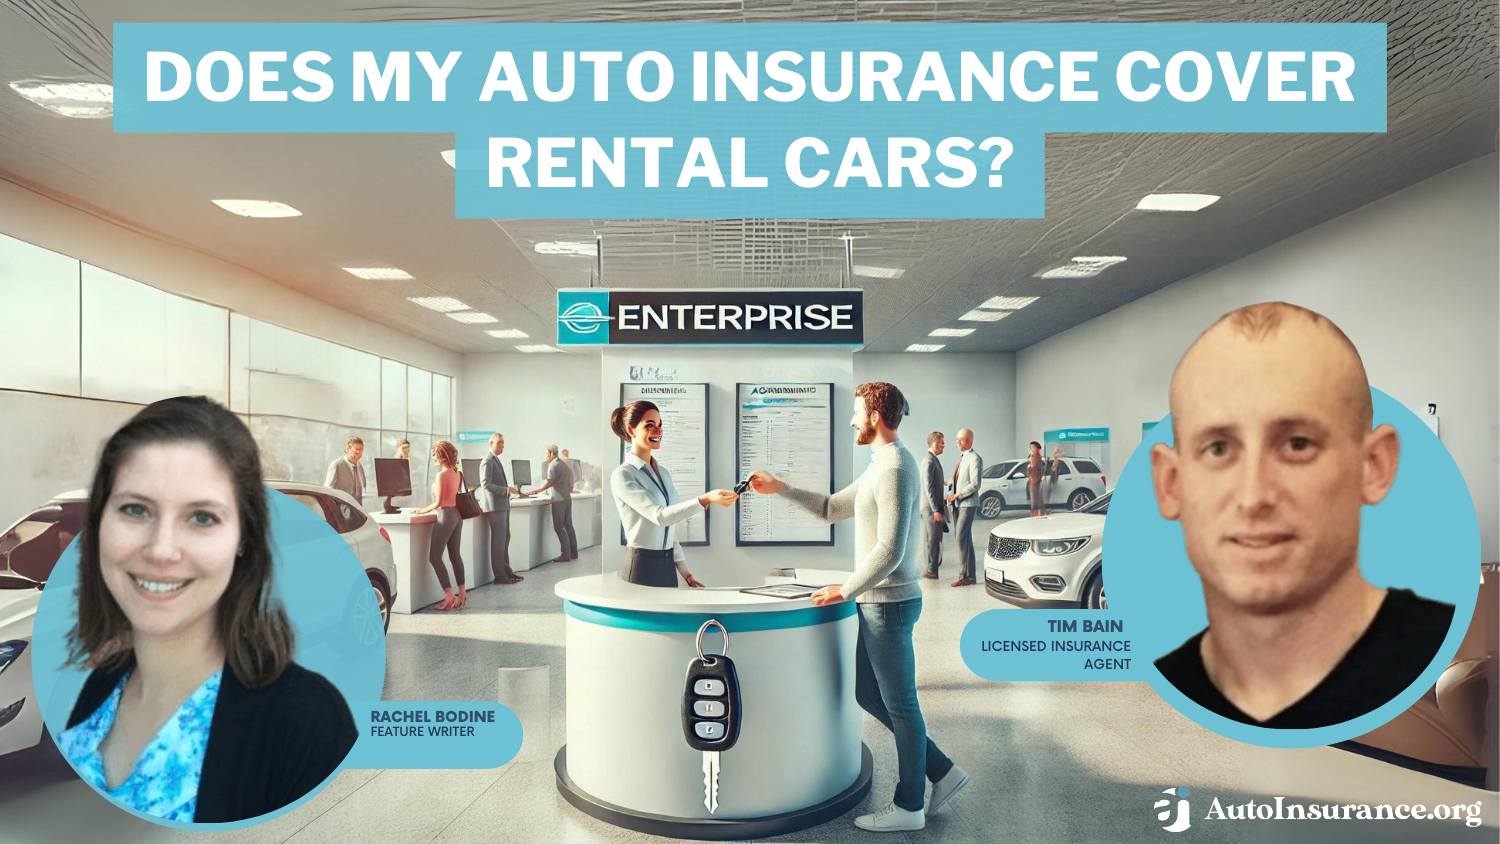 Does my auto insurance cover rental cars?